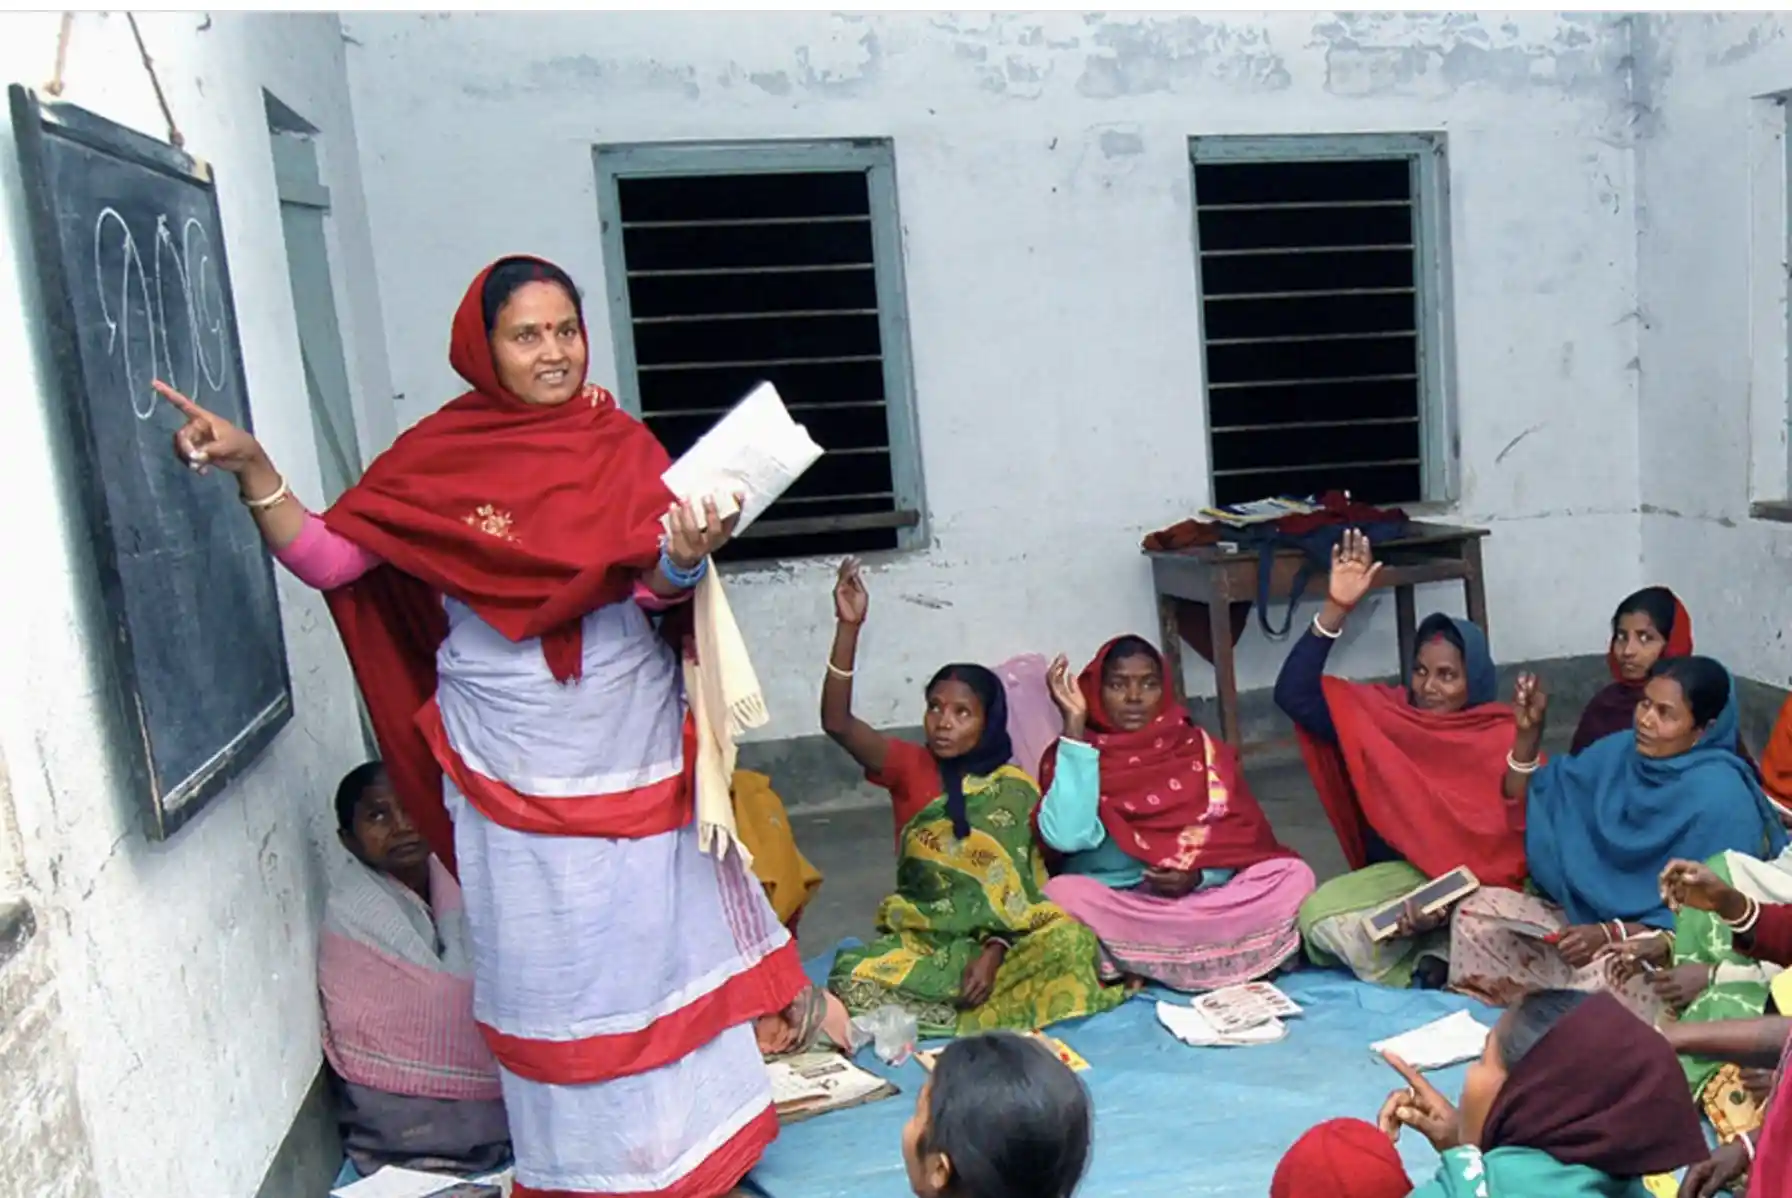 A health worker is giving a lesson in front of a chalkboard to a group of women. The women are sitting on the floor and some have their hands up.